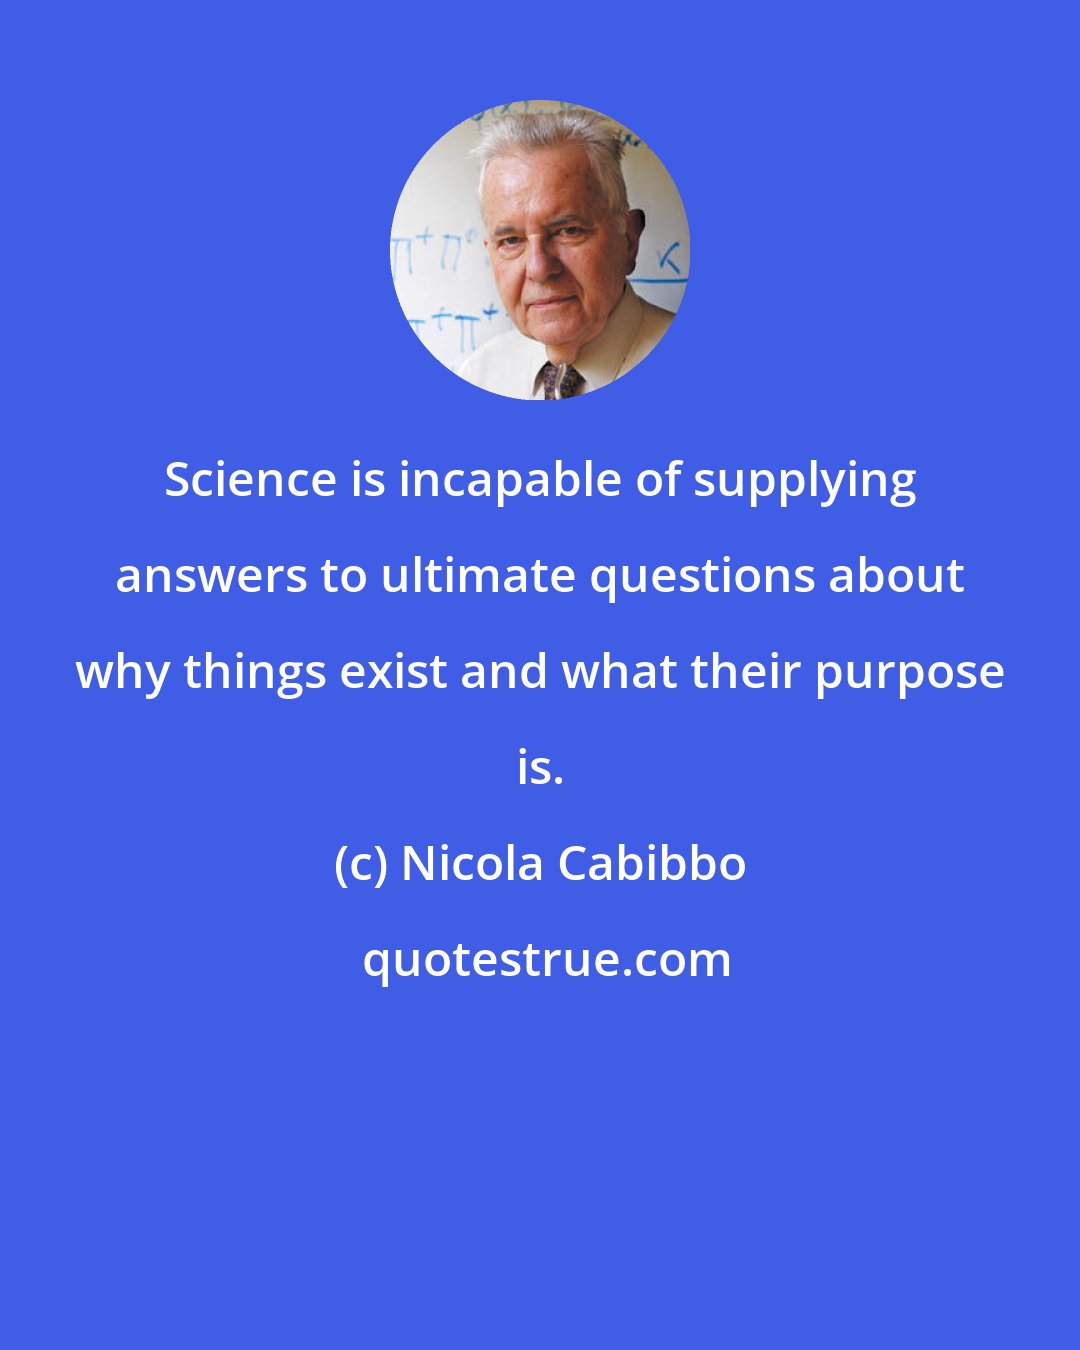 Nicola Cabibbo: Science is incapable of supplying answers to ultimate questions about why things exist and what their purpose is.